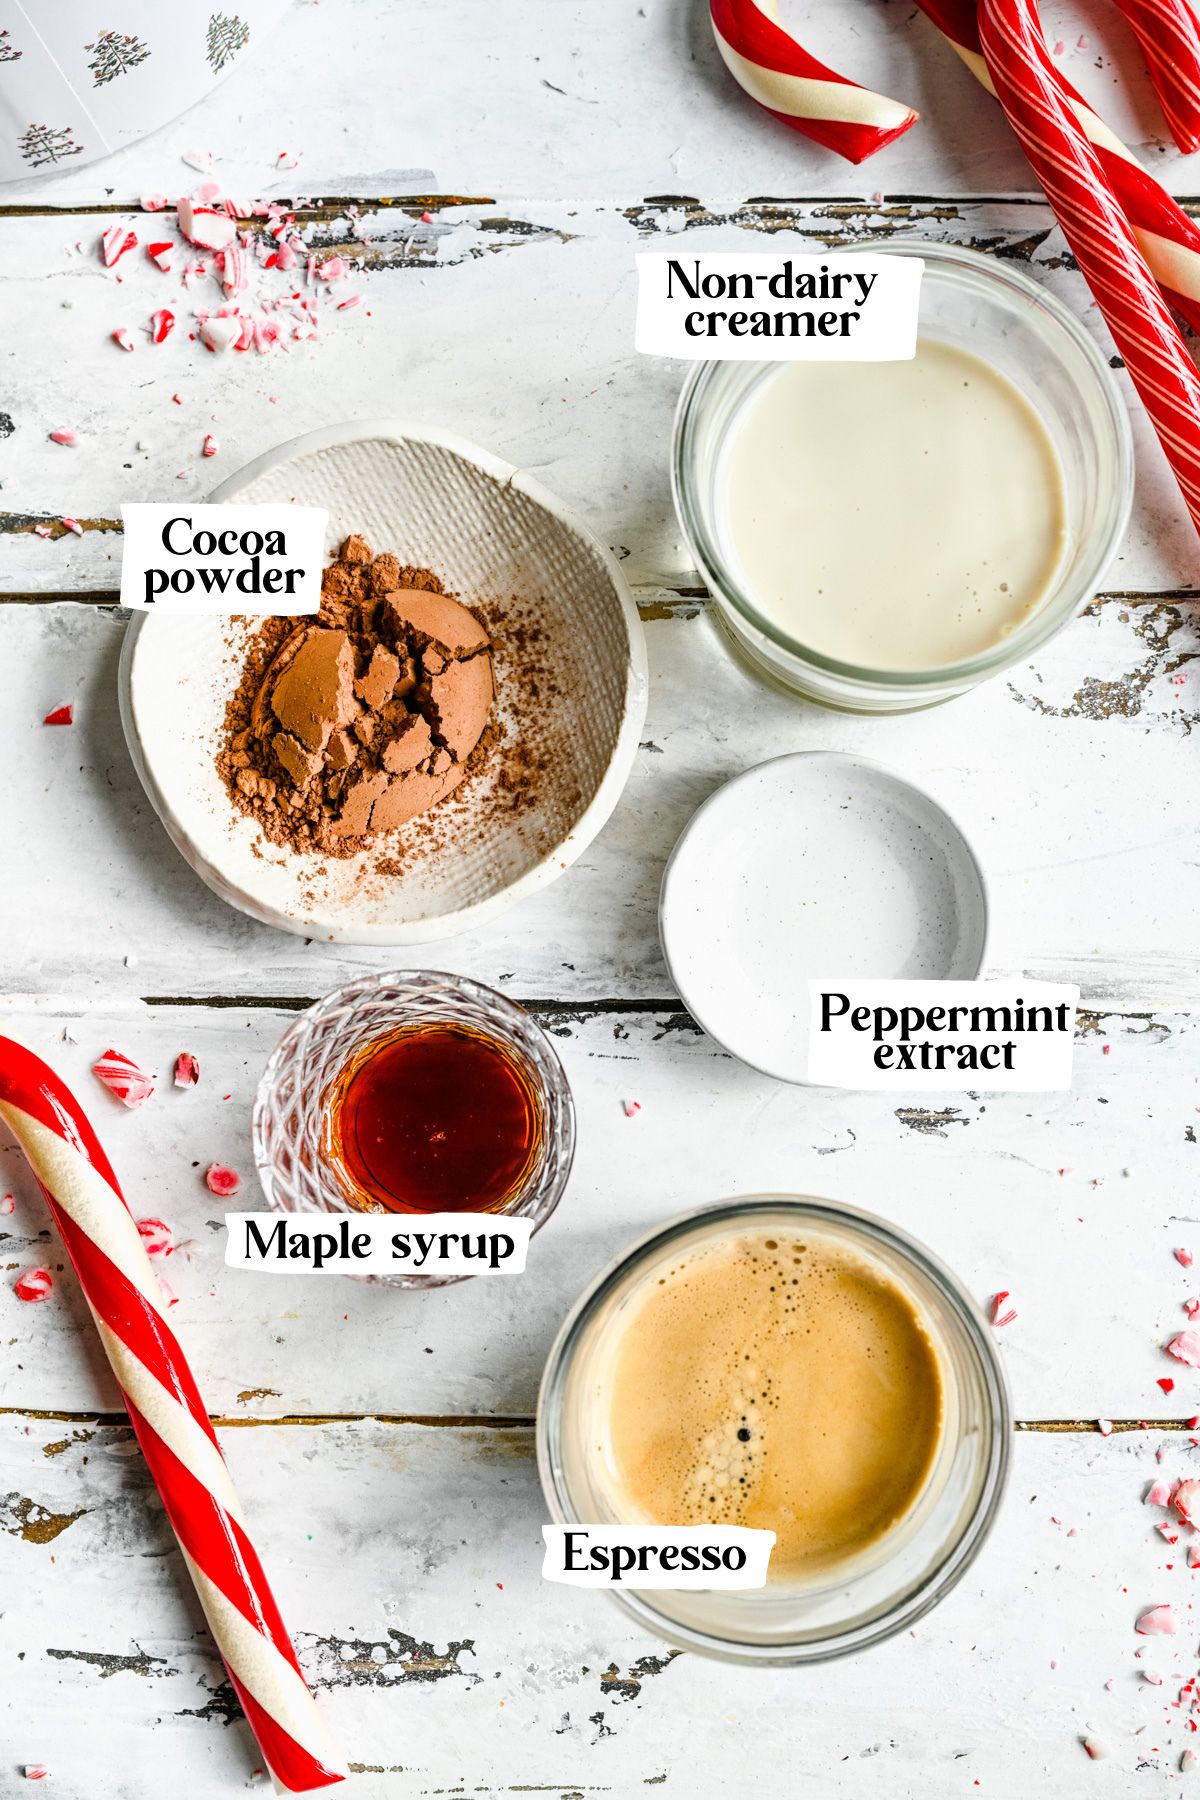 Peppermint mocha ingredients including maple syrup and cocoa powder.